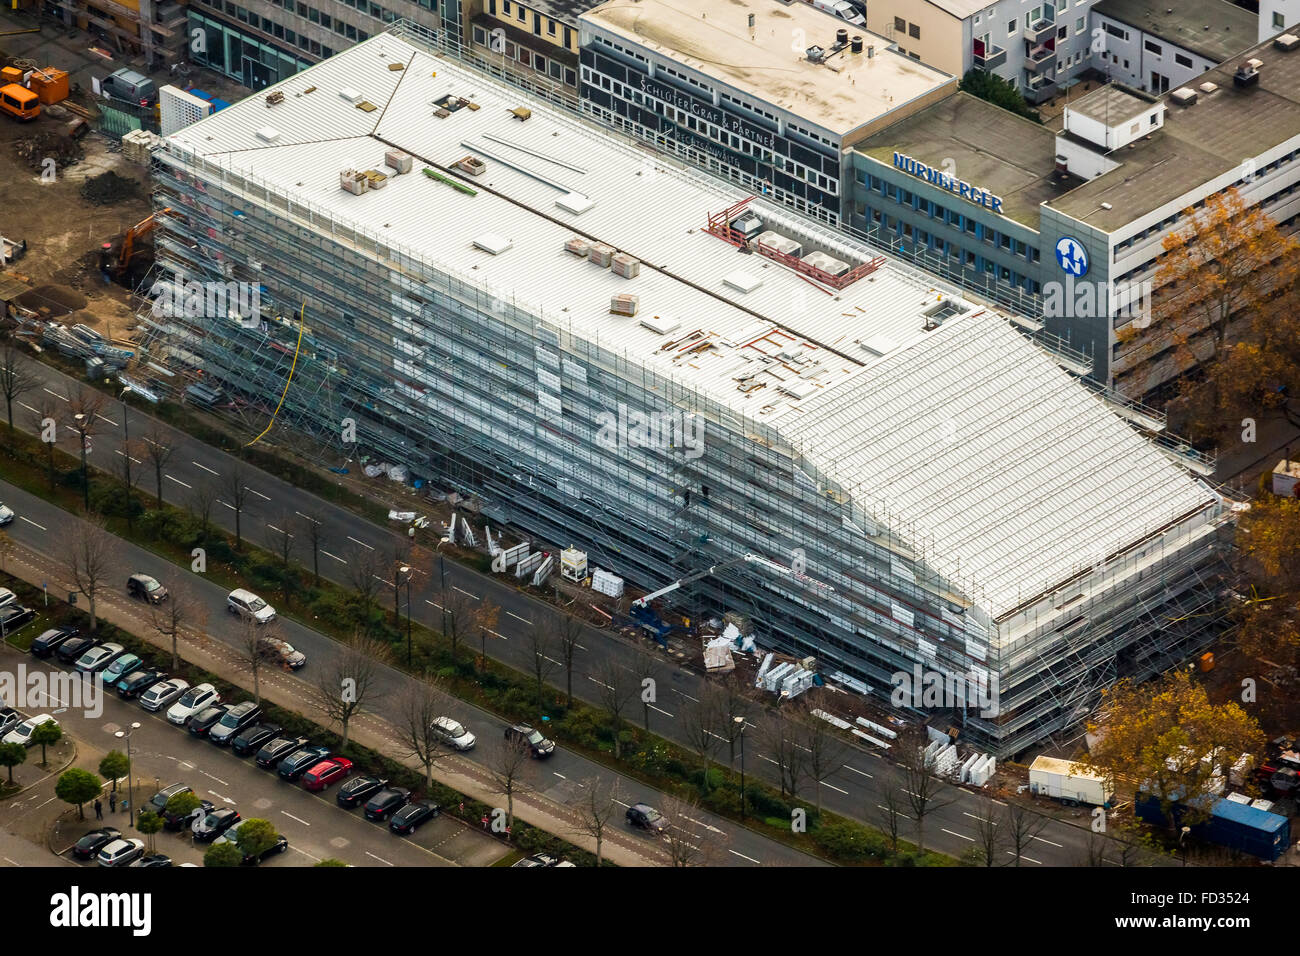 Aerial view, German Football Museum nearing completion, German Football Association, DFB, Dortmund, Ruhr area, Stock Photo